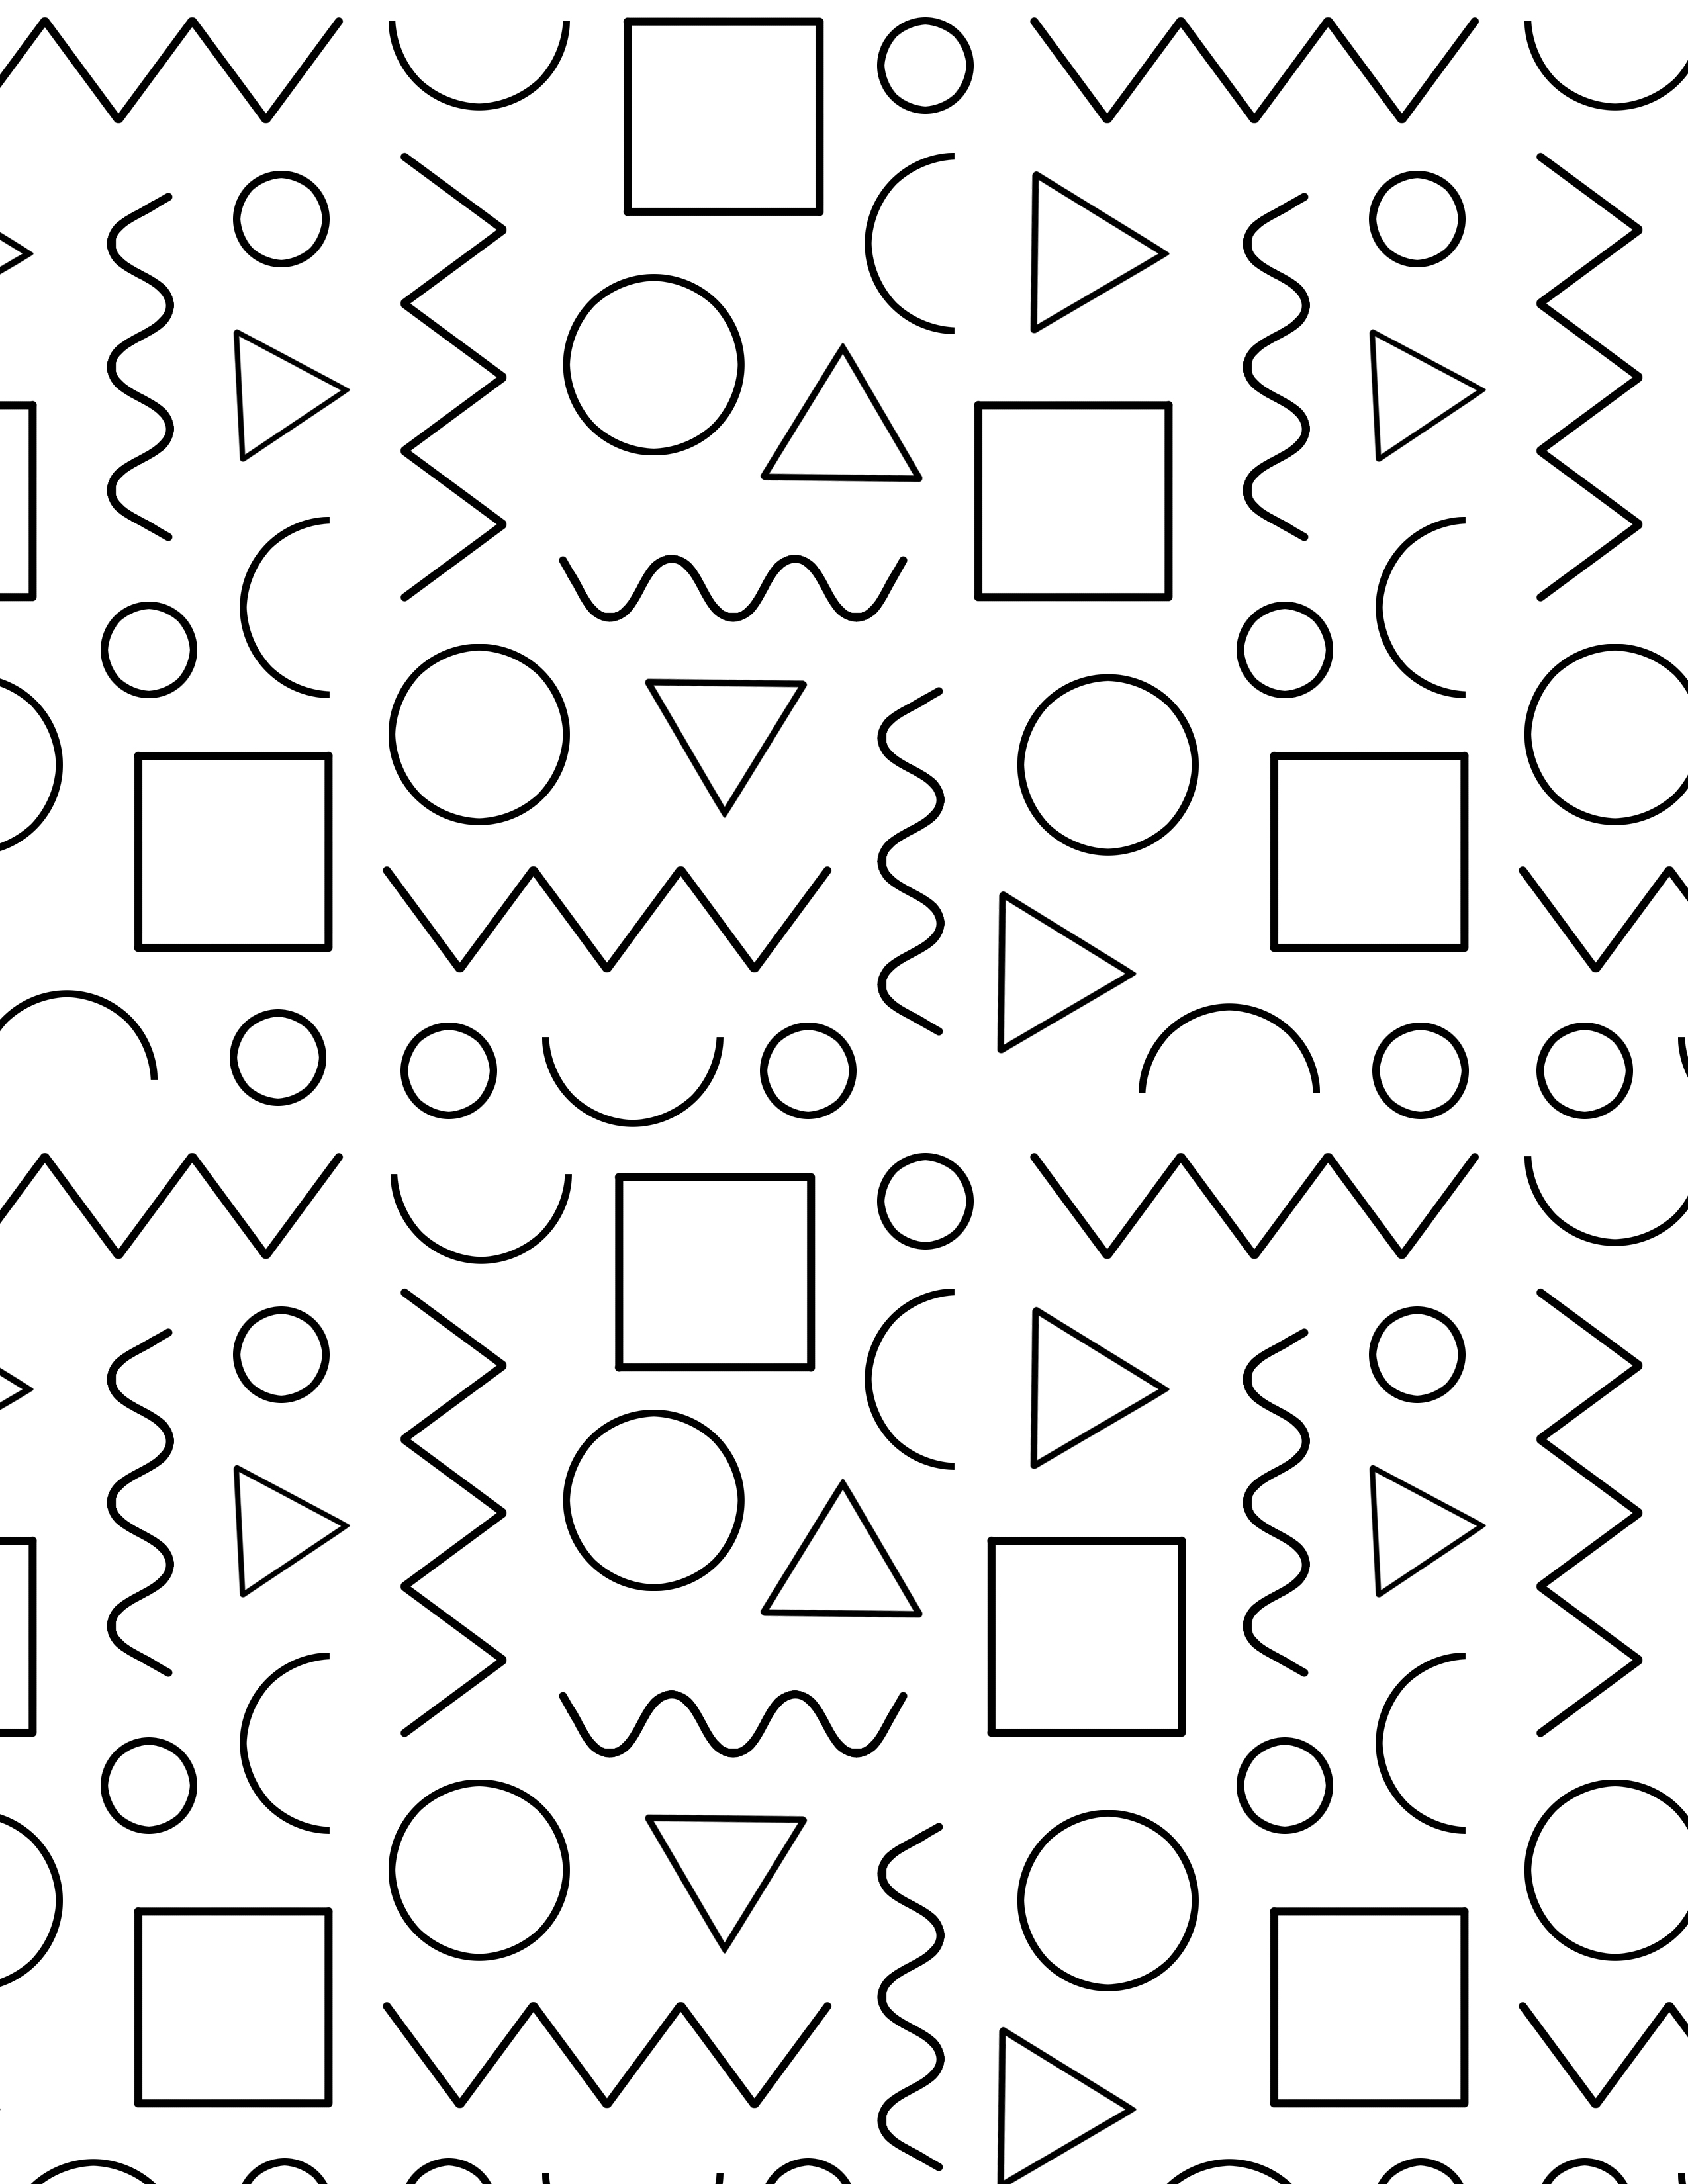 Minima Gift Wrap, Minimalist Wrapping Paper, Black and White Gift Wrap,  Gray-scale Gift Wrap, Decoupage Paper, Geschenkpapier, Printable